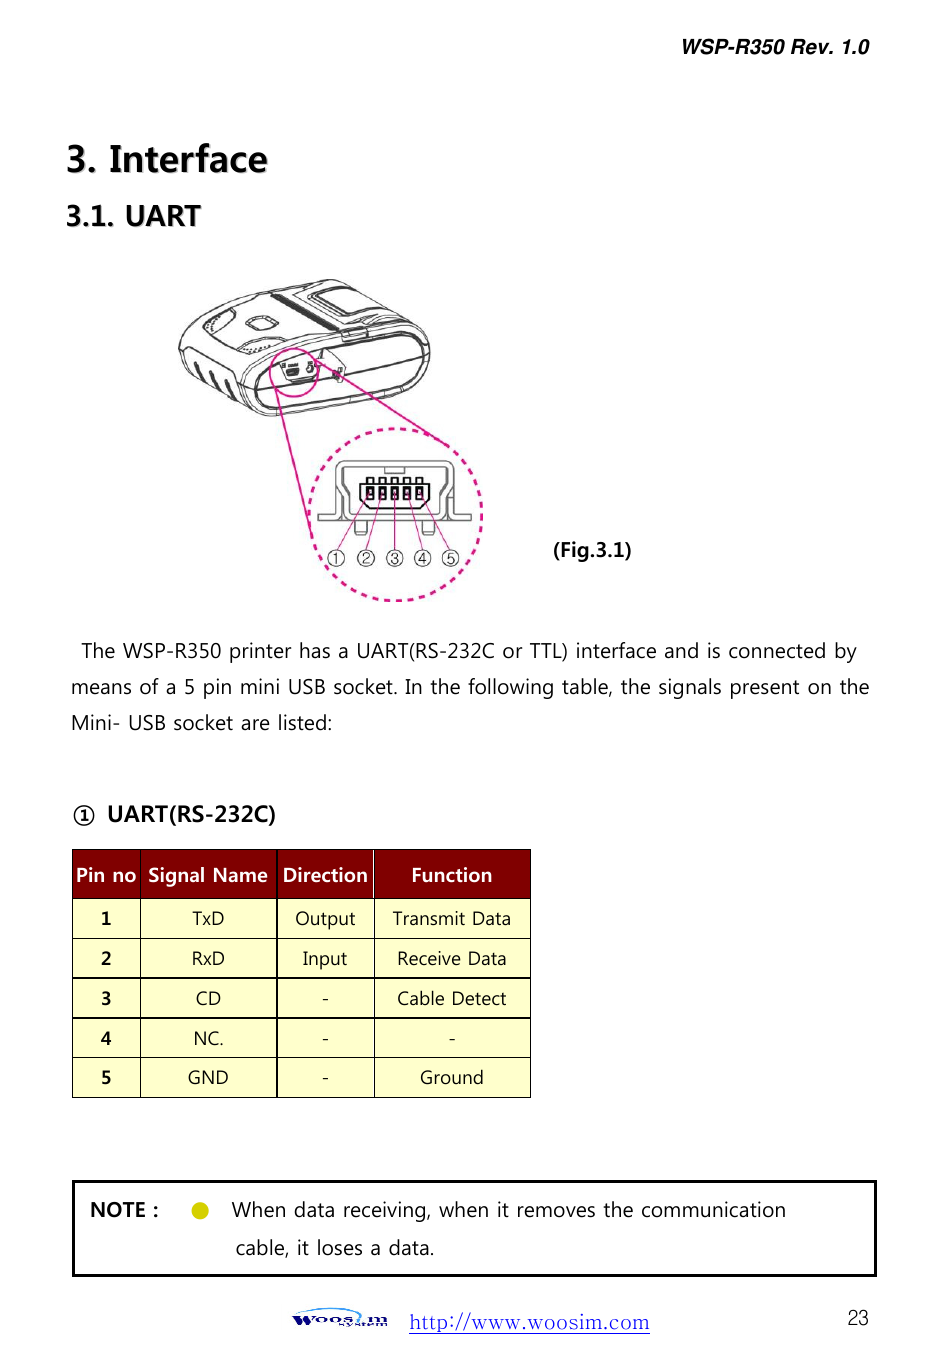 WSP-R350 Rev. 1.0     http://www.woosim.com 23 33..  IInntteerrffaaccee  33..11..  UUAARRTT                                          The WSP-R350 printer has a UART(RS-232C or TTL) interface and is connected by means of a 5 pin mini USB socket. In the following table, the signals present on the Mini- USB socket are listed:                      Pin no Signal Name Direction Function 1 TxD Output Transmit Data 2 RxD Input Receive Data 3 CD - Cable Detect 4 NC. - - 5 GND - Ground  ①  UART(RS-232C) NOTE :      ●   When data receiving, when it removes the communication               cable, it loses a data.  (Fig.3.1)   